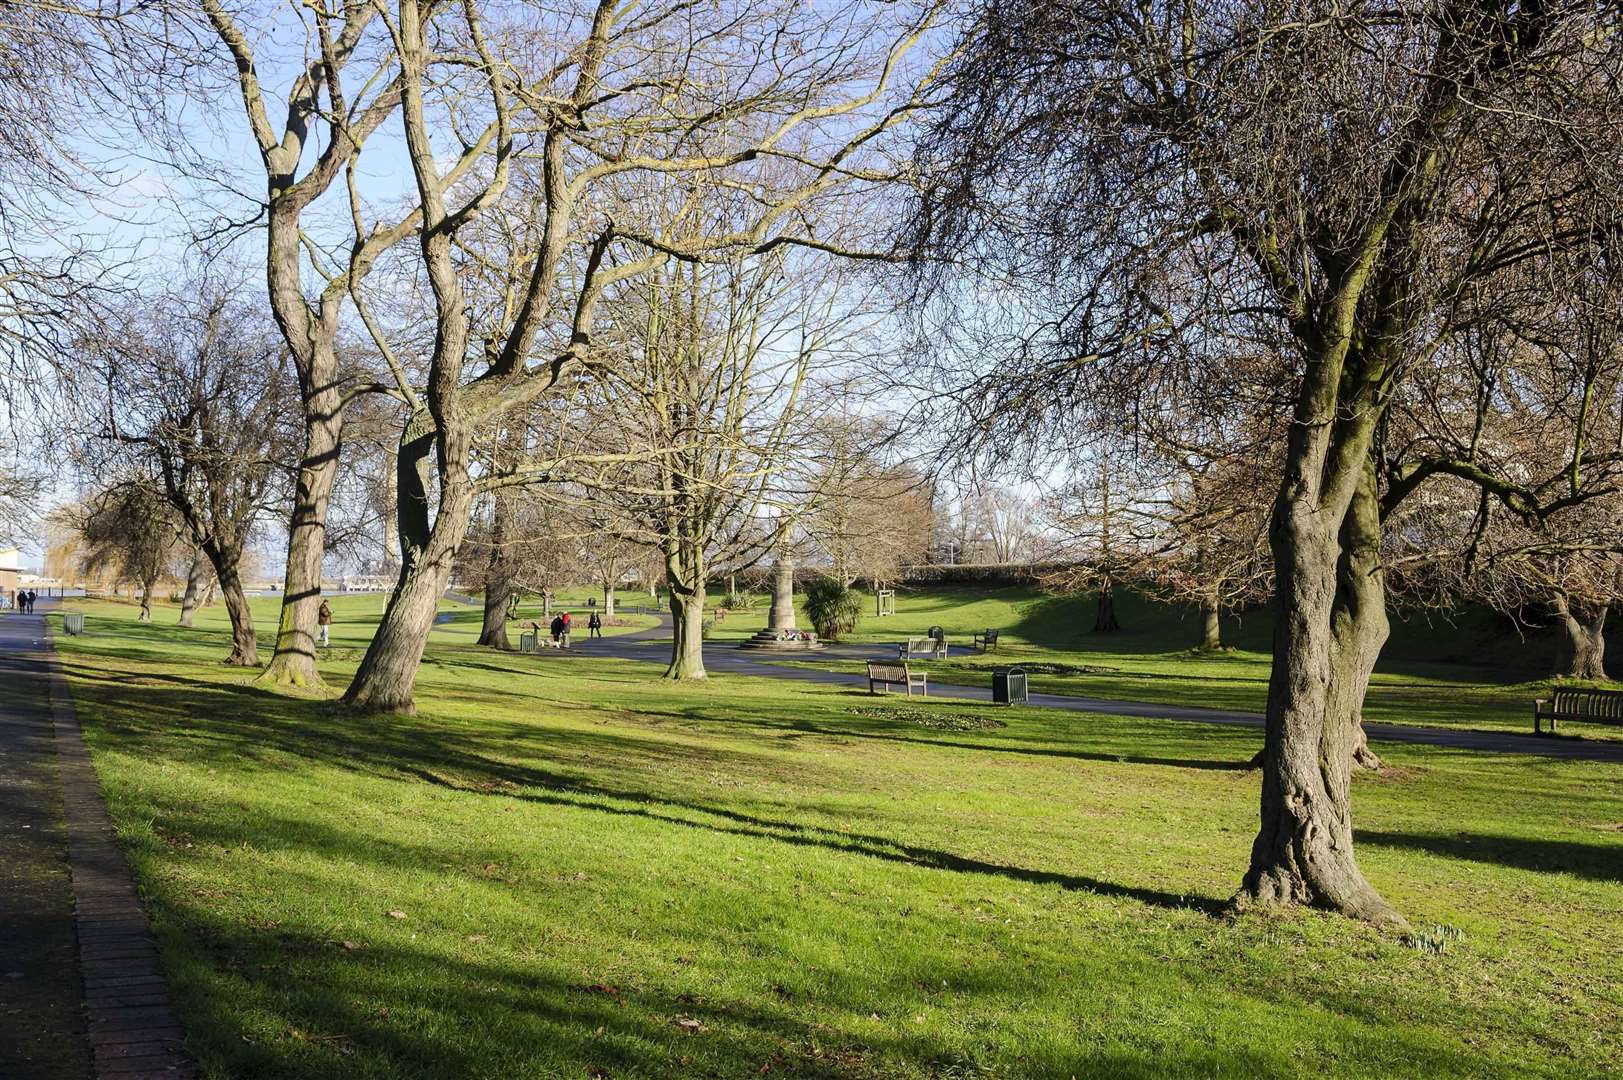 Green spaces aplenty at the Promenade and riverside area in Gravesend